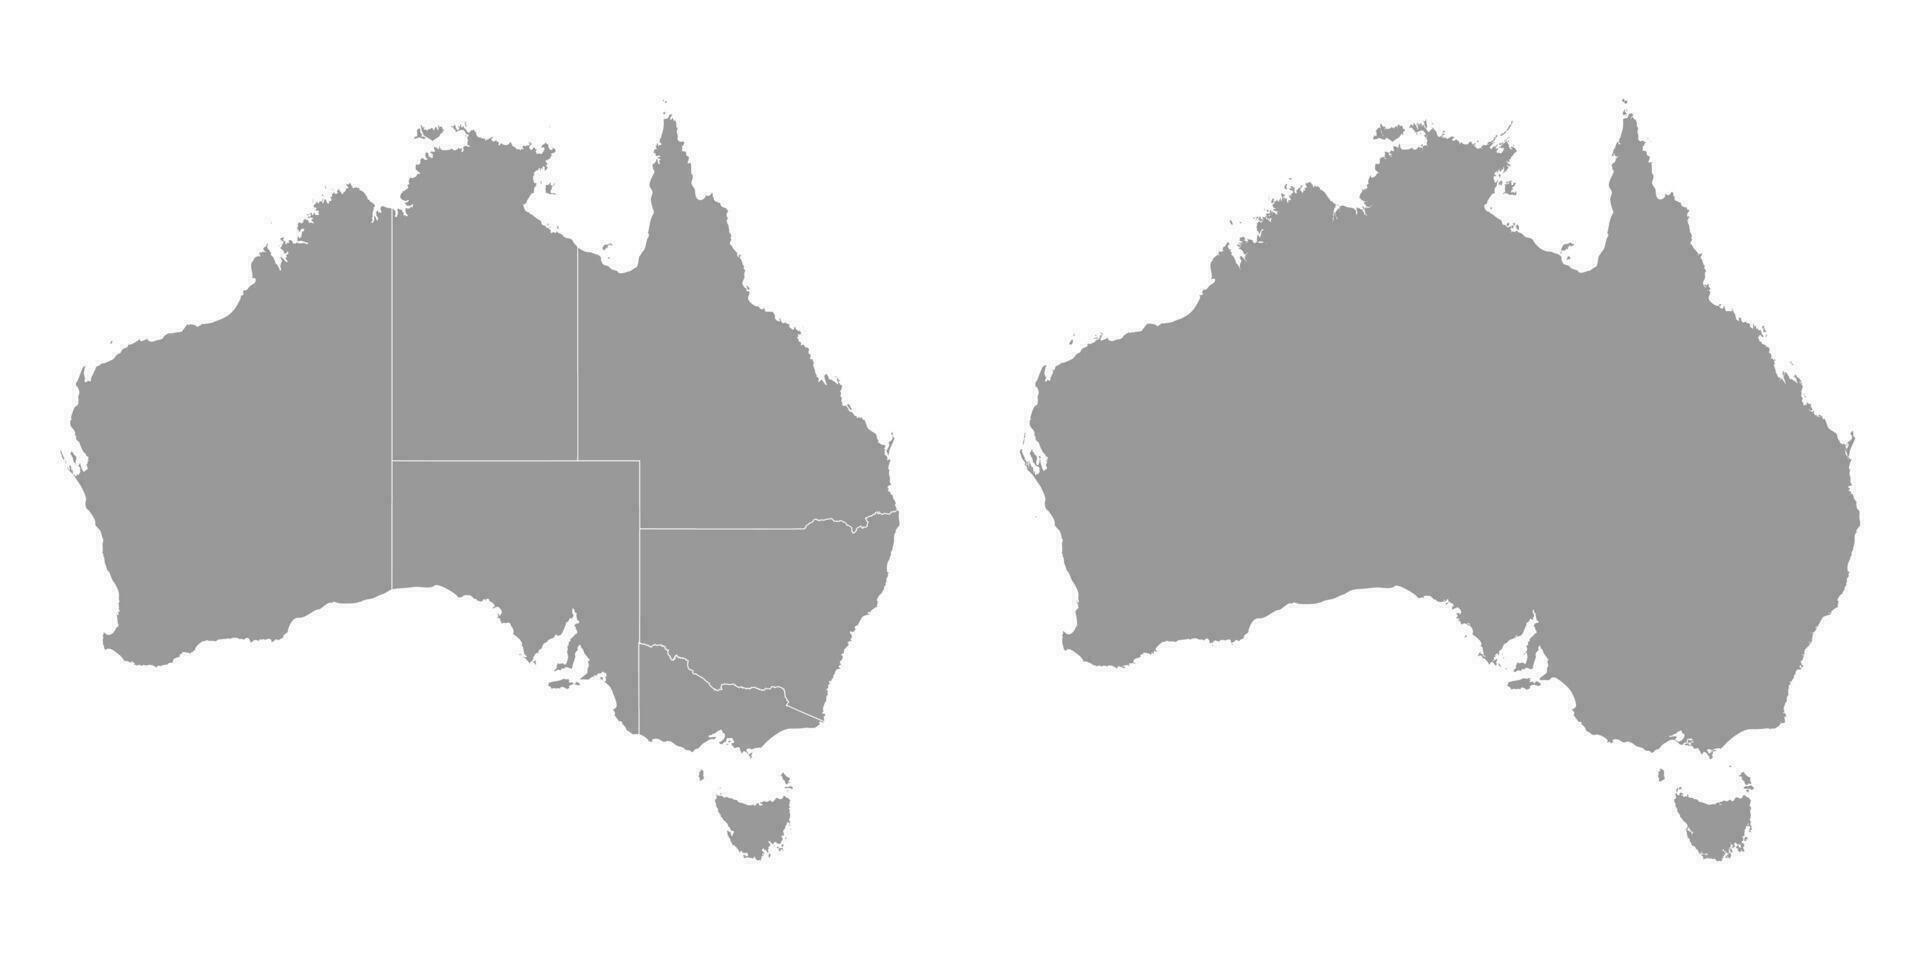 Australia gray map with states. Vector Illustration.